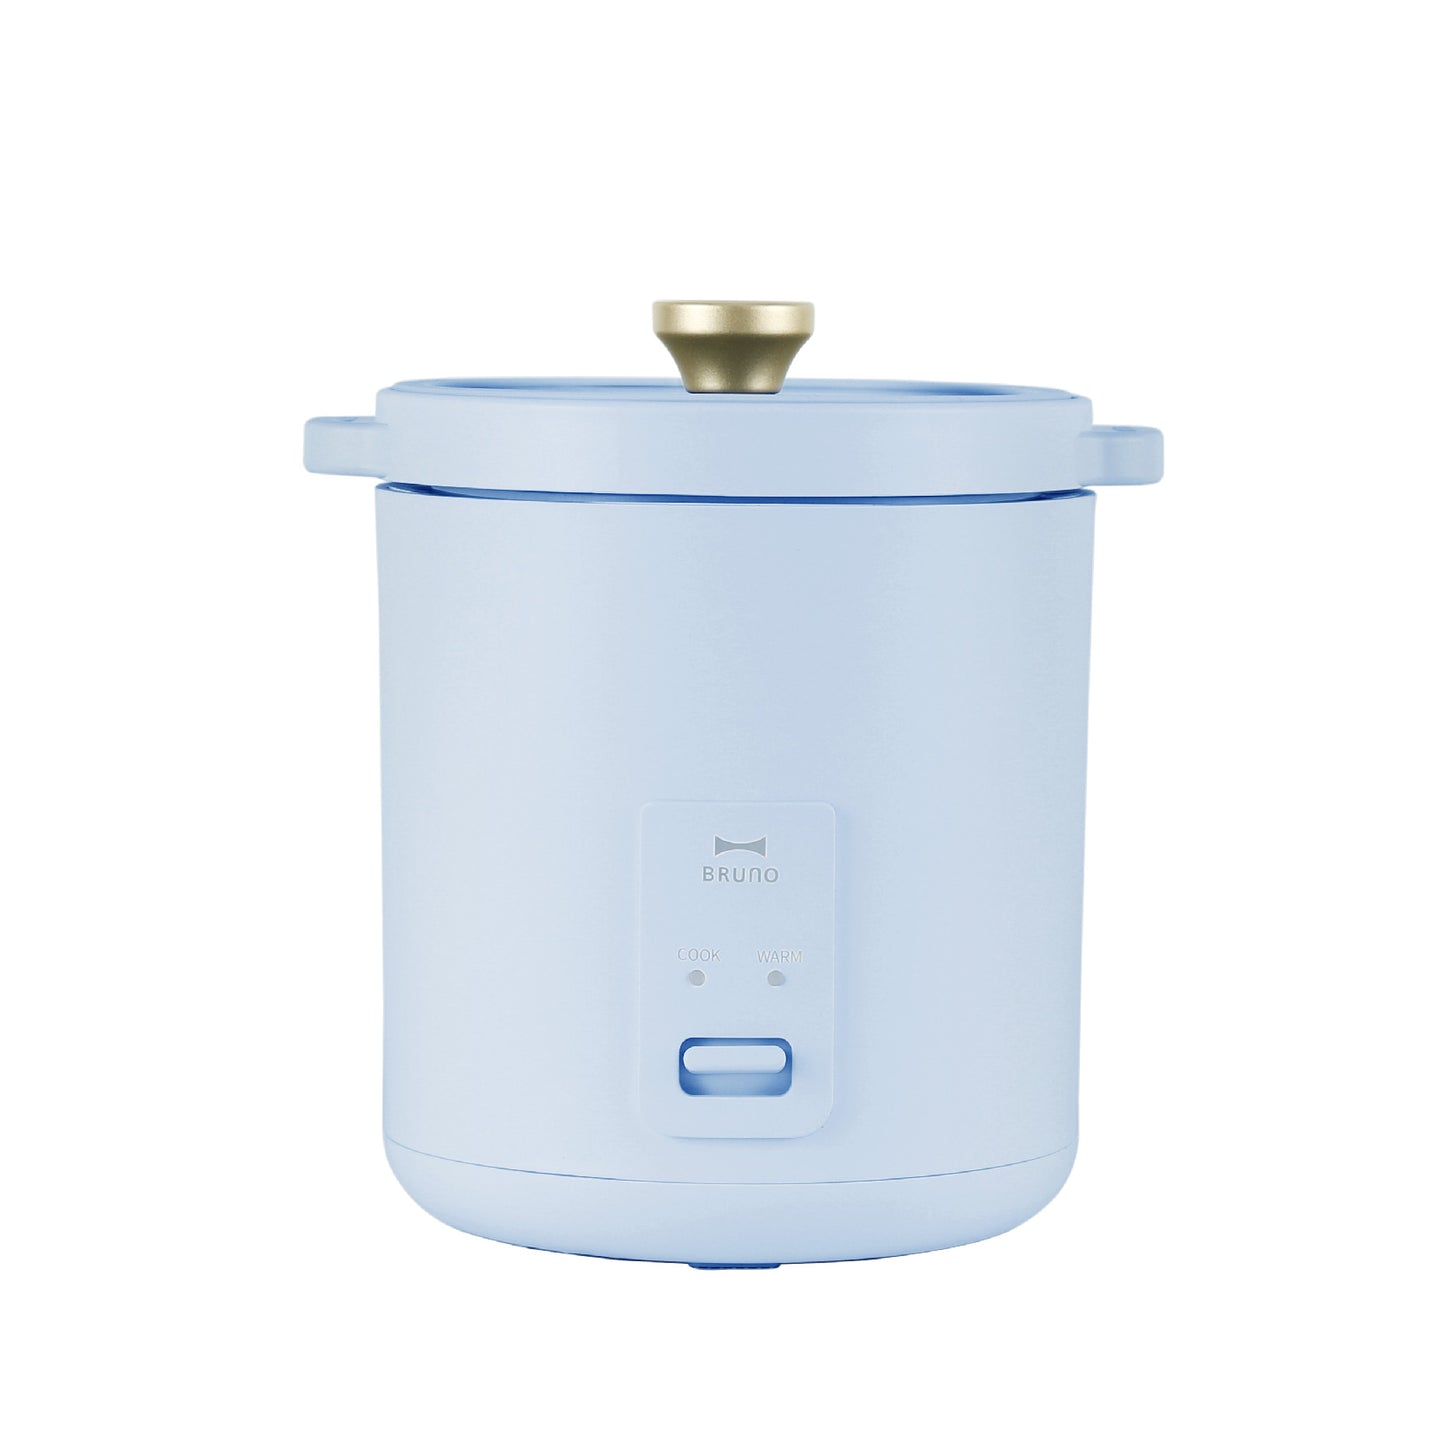 Compact Rice Cooker in Light Blue